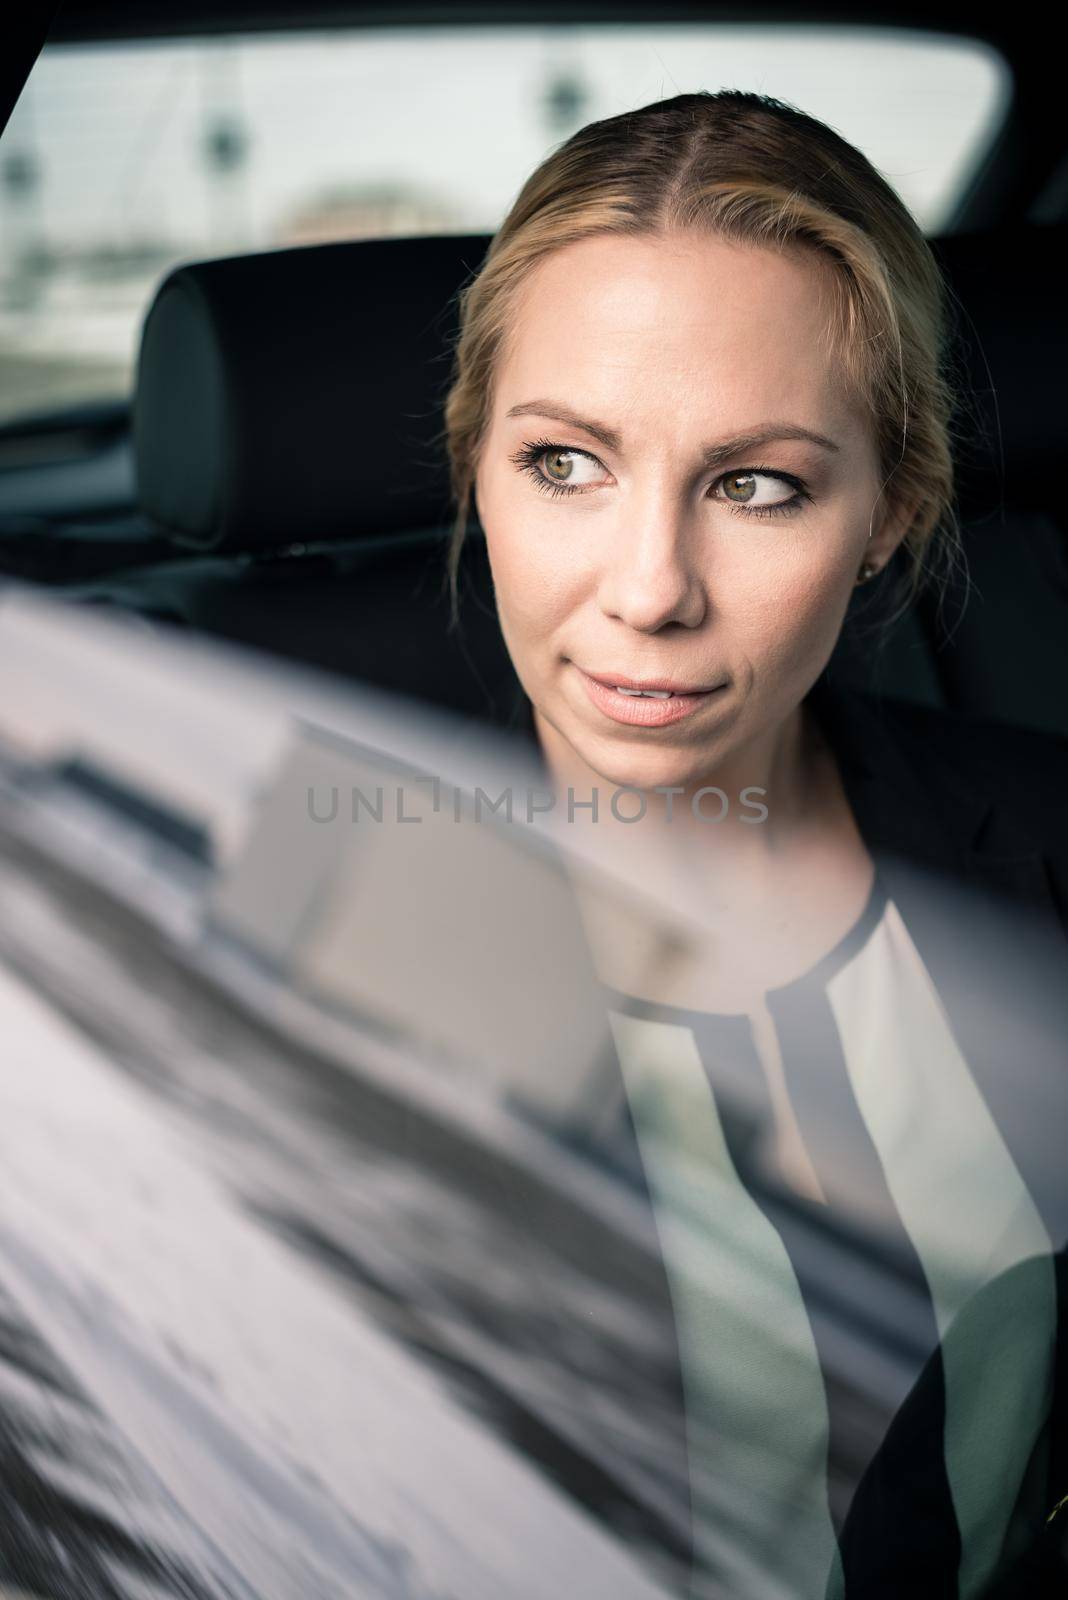 Confident young businesswoman travelling by car seen through car window